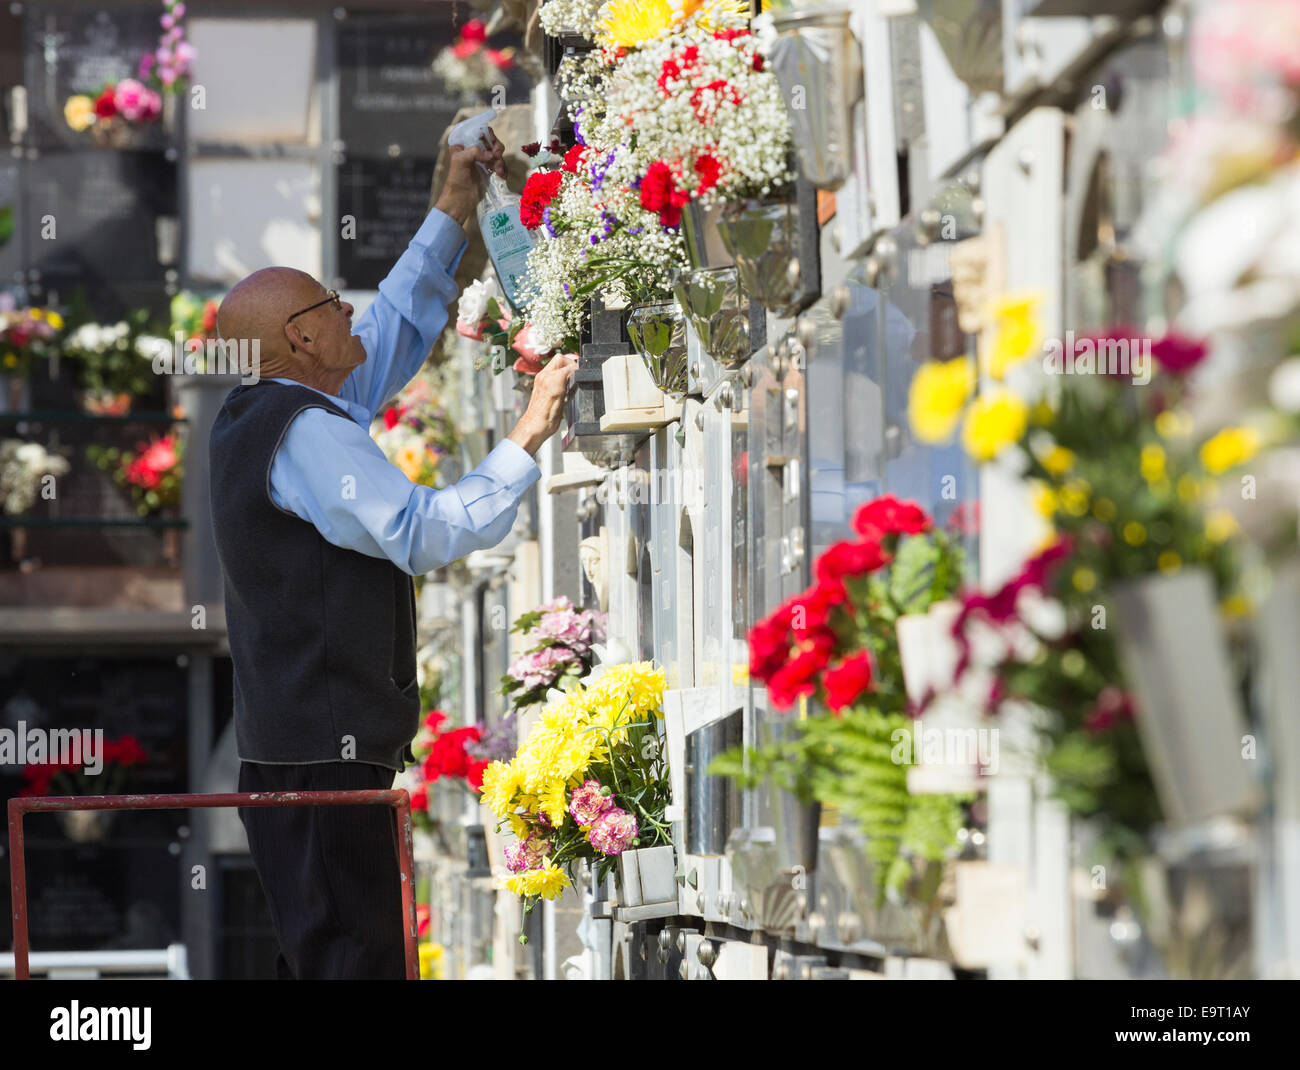 Las Palmas, Gran Canaria, Canary Islands, Spain. 1st November, 2014. Relatives bringing flowers to the cemetery to remember loved ones; a tradition in Spain and many other countries on  Dia de Todos los Santos (All Saints` Day). Credit:  ALANDAWSONPHOTOGRAPHY/Alamy Live News Stock Photo